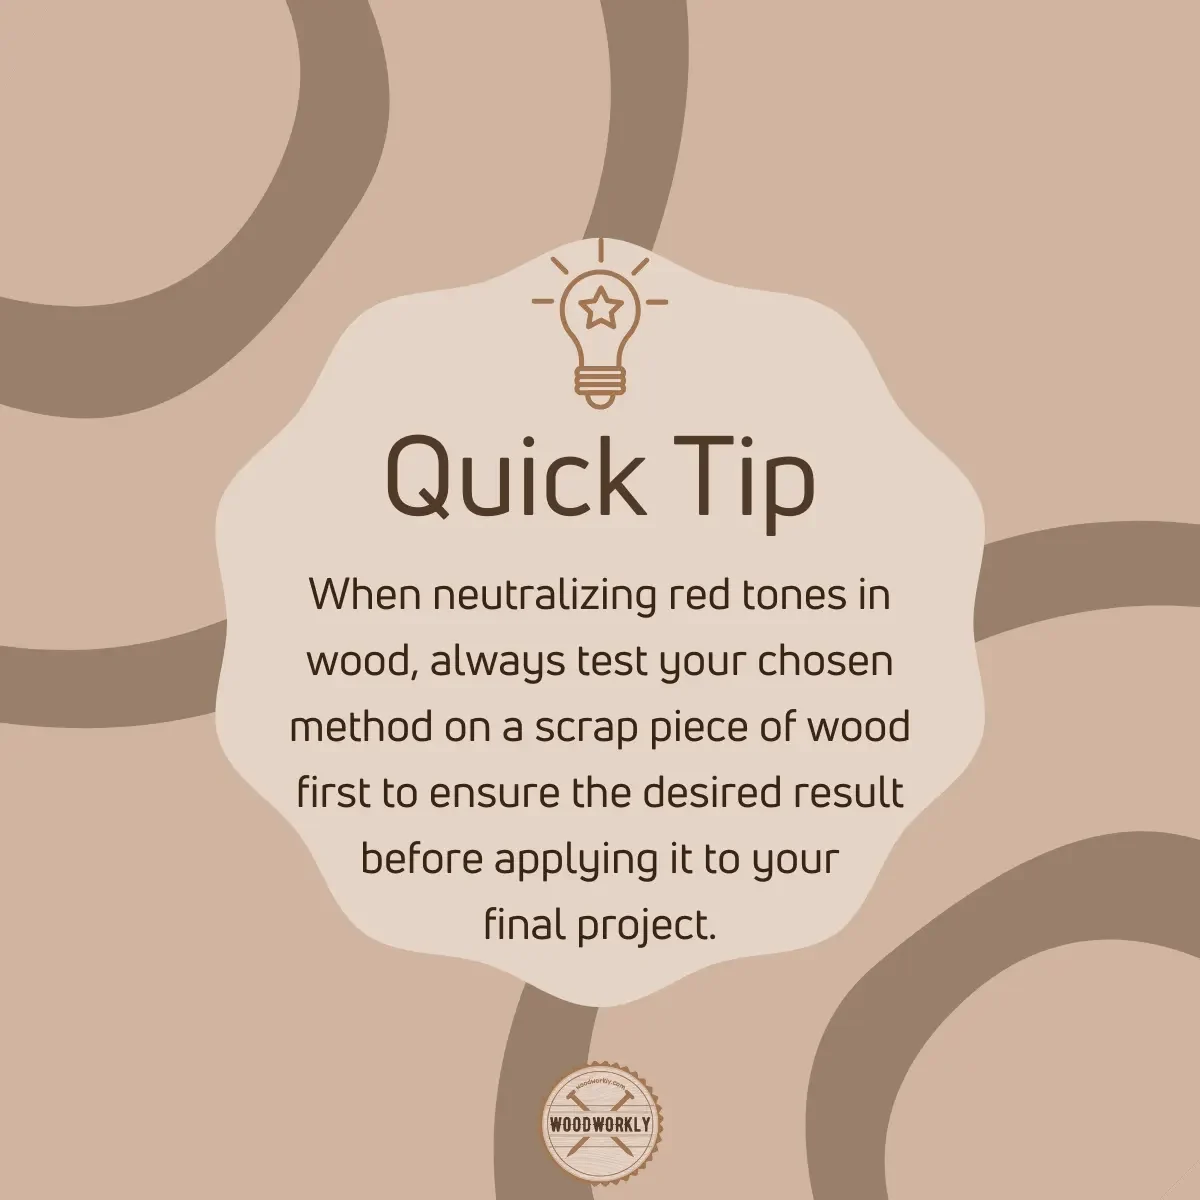 quick tip to neutralize red tones in wood